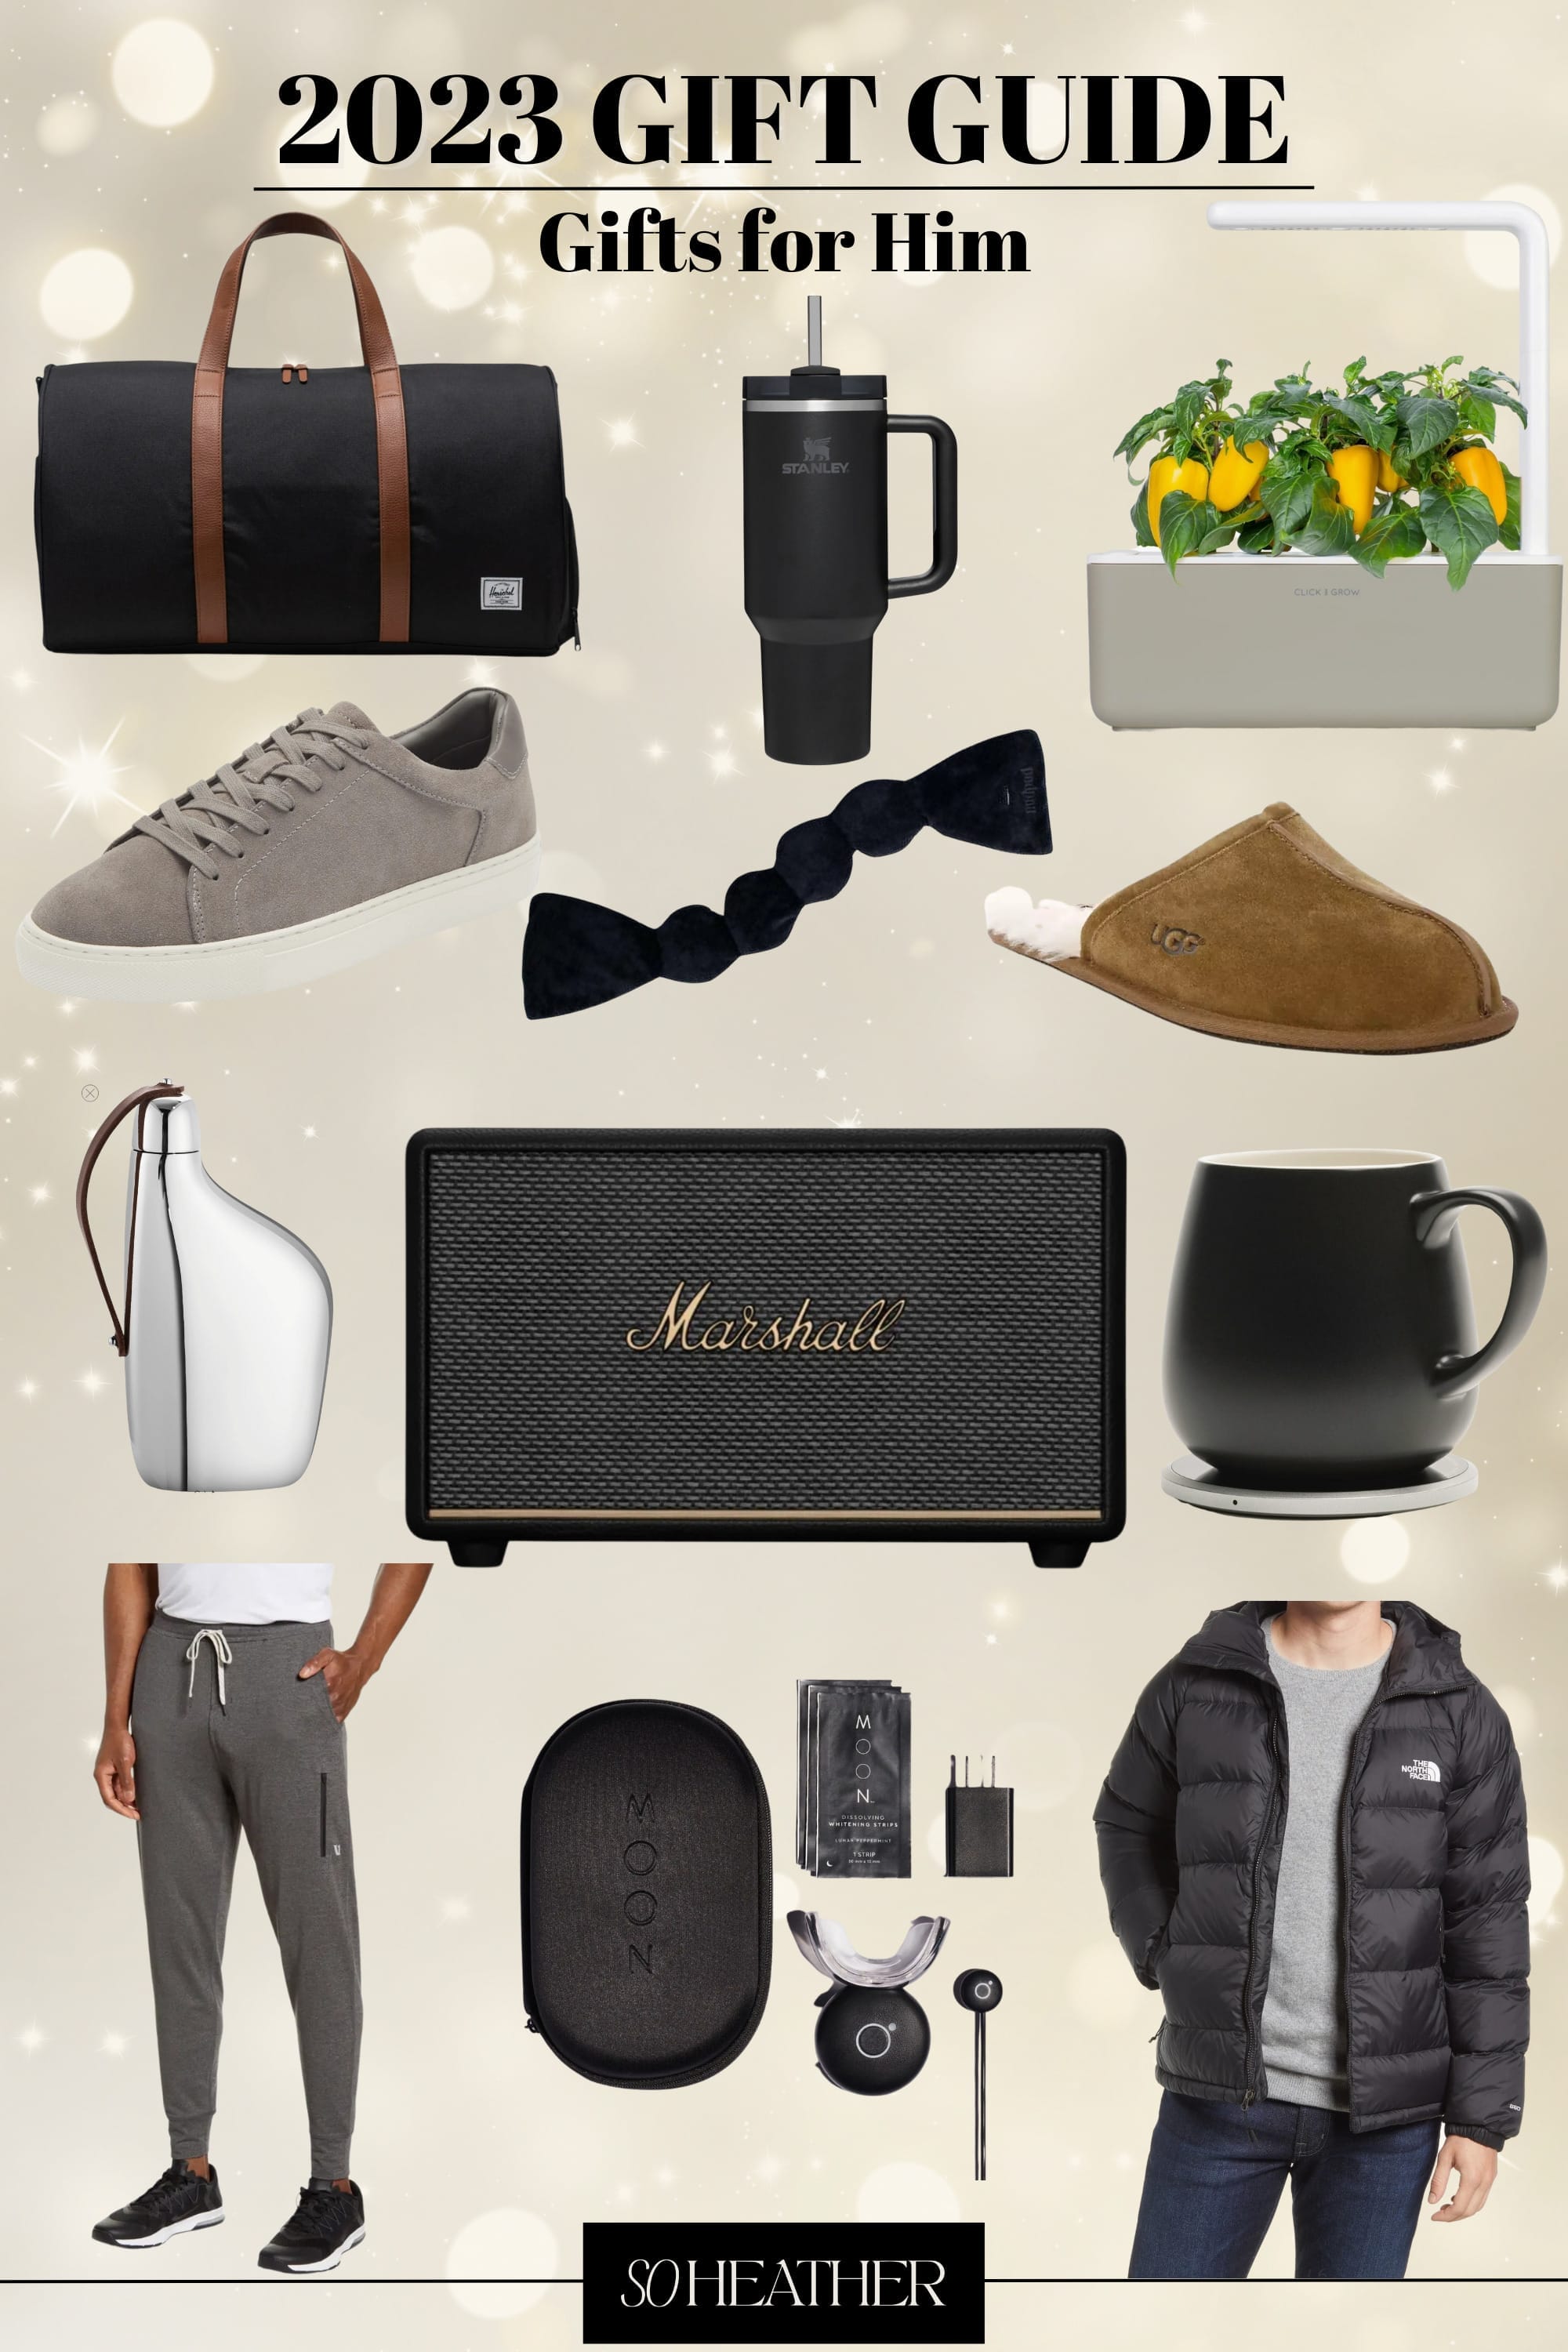 2023 Holiday Gift Guide for Him - The Fitnessista